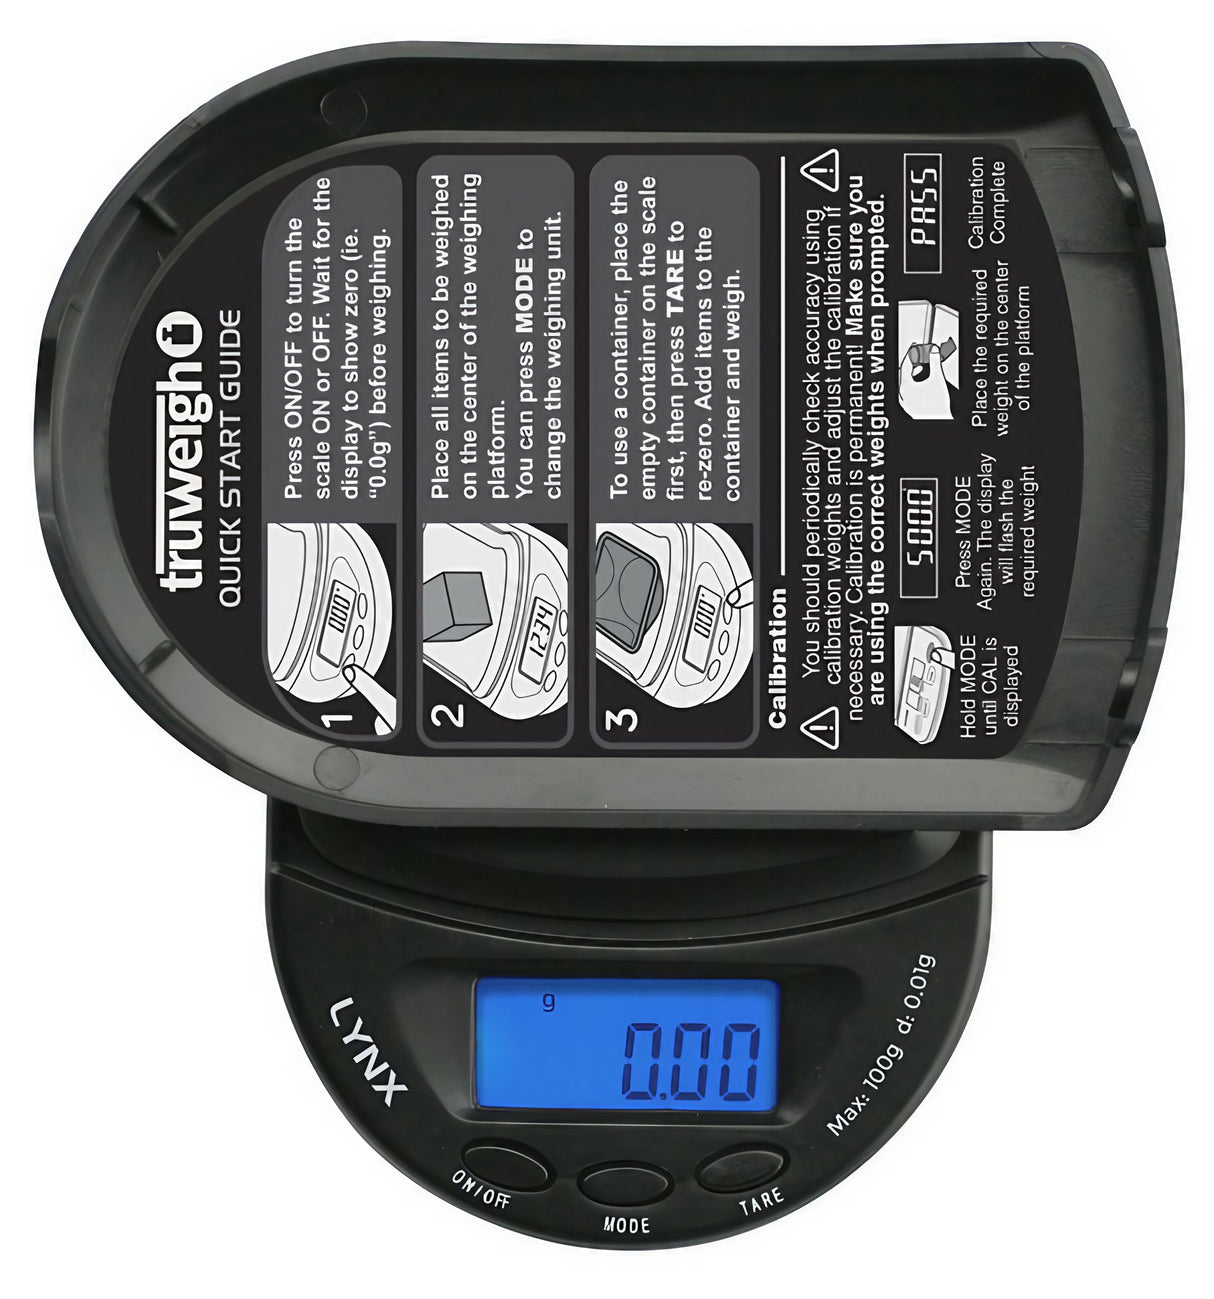 Truweigh Lynx Digital Mini Scale in black, open lid, displaying 0.00, portable design, battery-powered